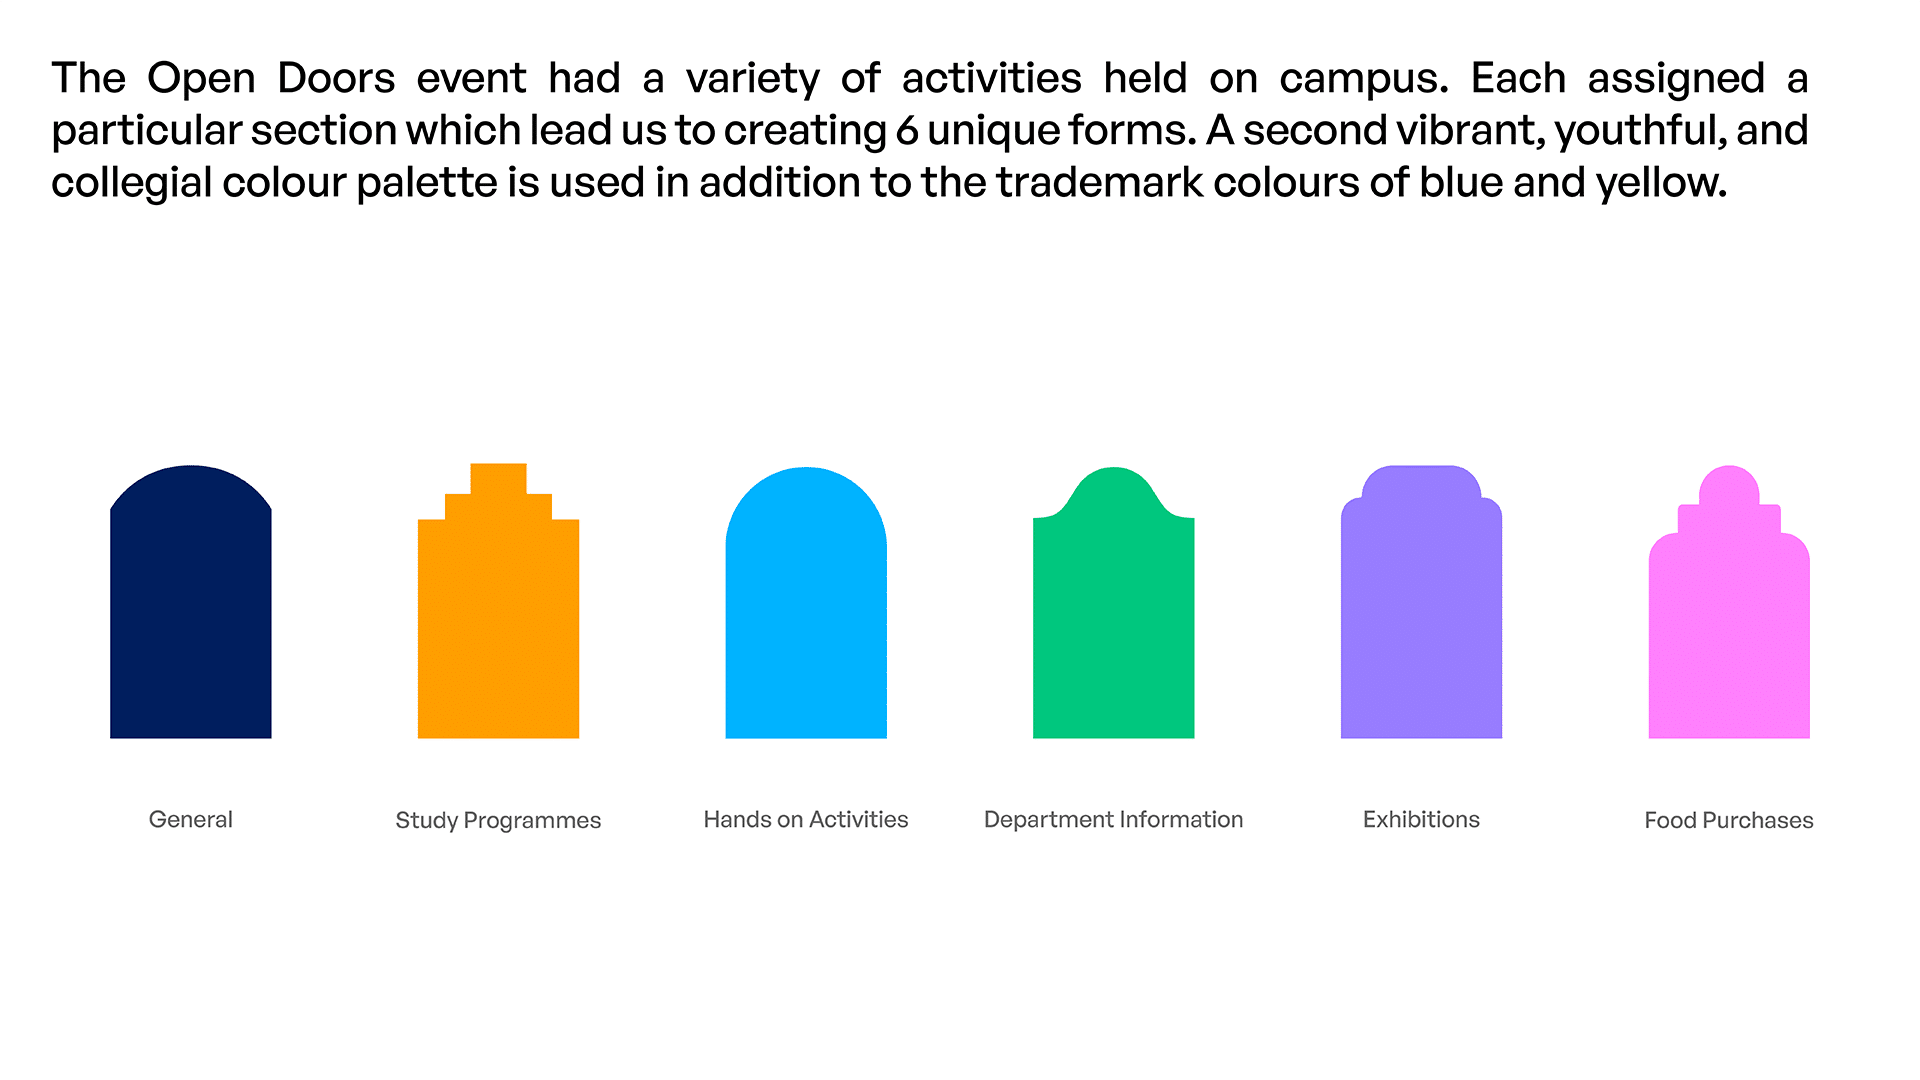 A Vibrant Image Capturing Campus Activities with Youthful Color Palette. Six Distinct Sections Representing a Diverse Range of Engaging Activities, Enriched by Blue and Yellow Trademark Colors.